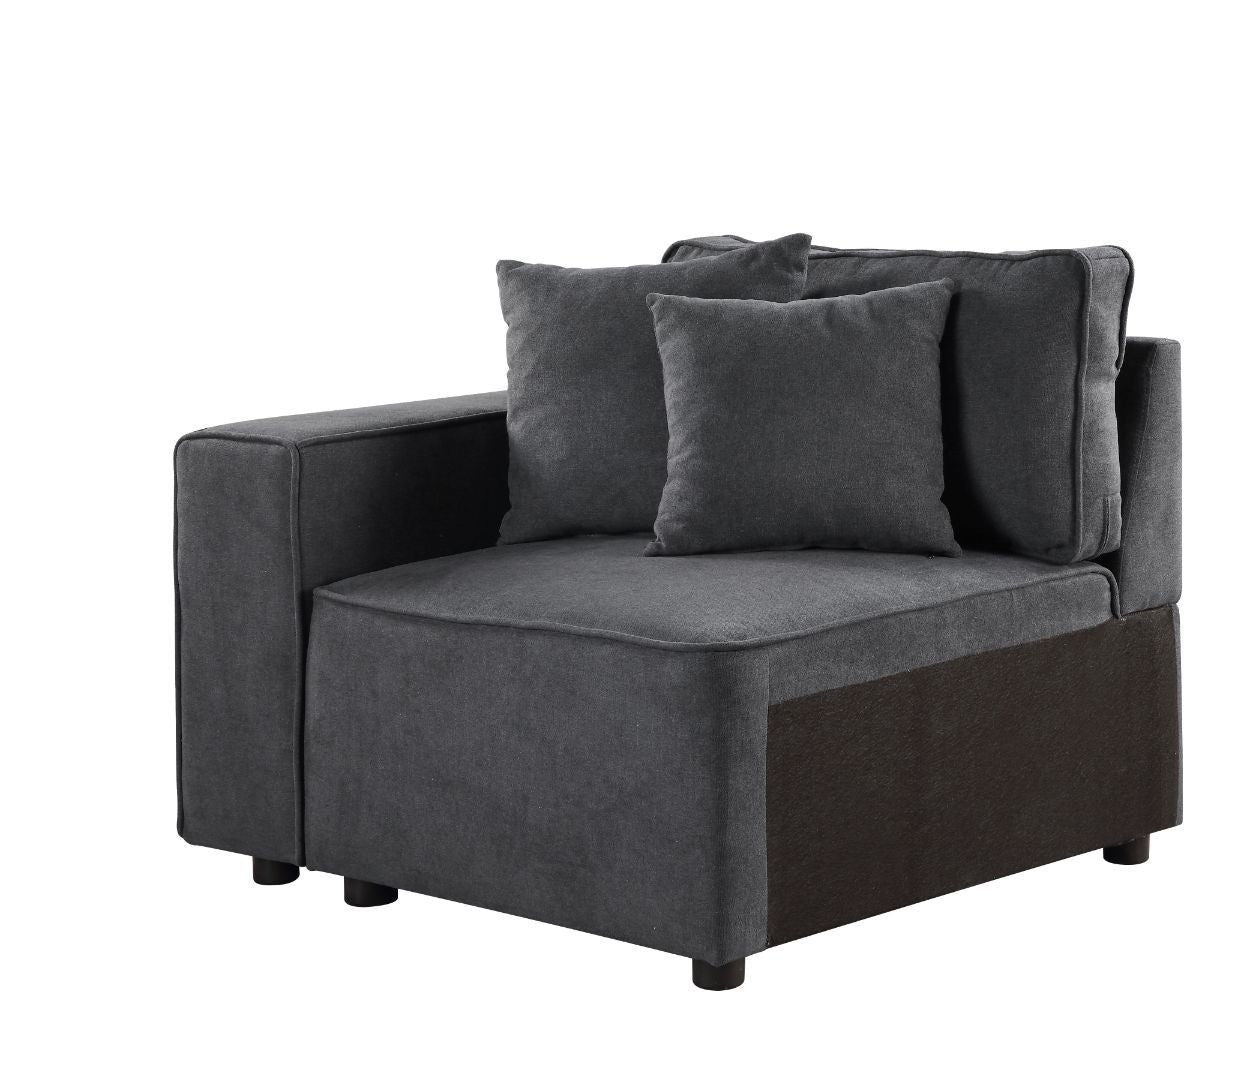 Silvester - Arms - Gray Fabric - Tony's Home Furnishings